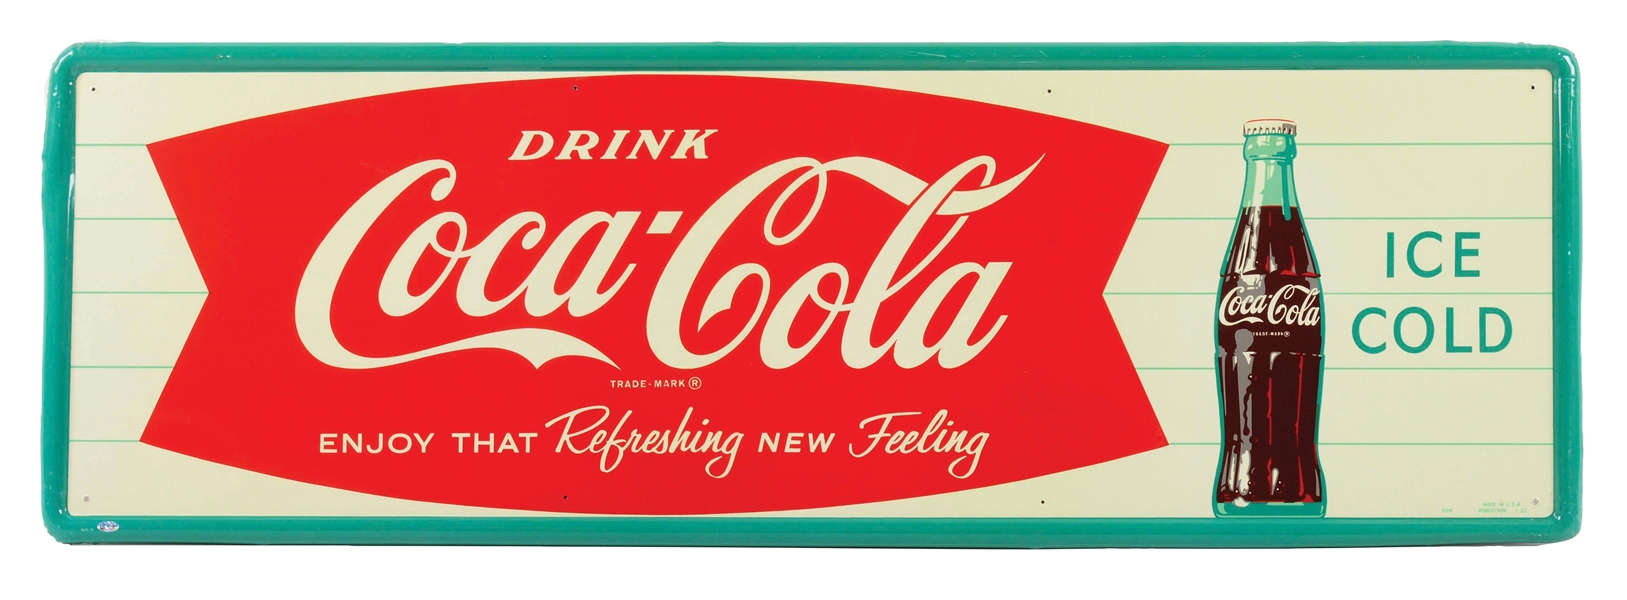 DRINK COCA COLA "ENJOY THAT REFRESHING NEW FEELING" TIN SIGN W/ BOTTLE GRAPHIC. 